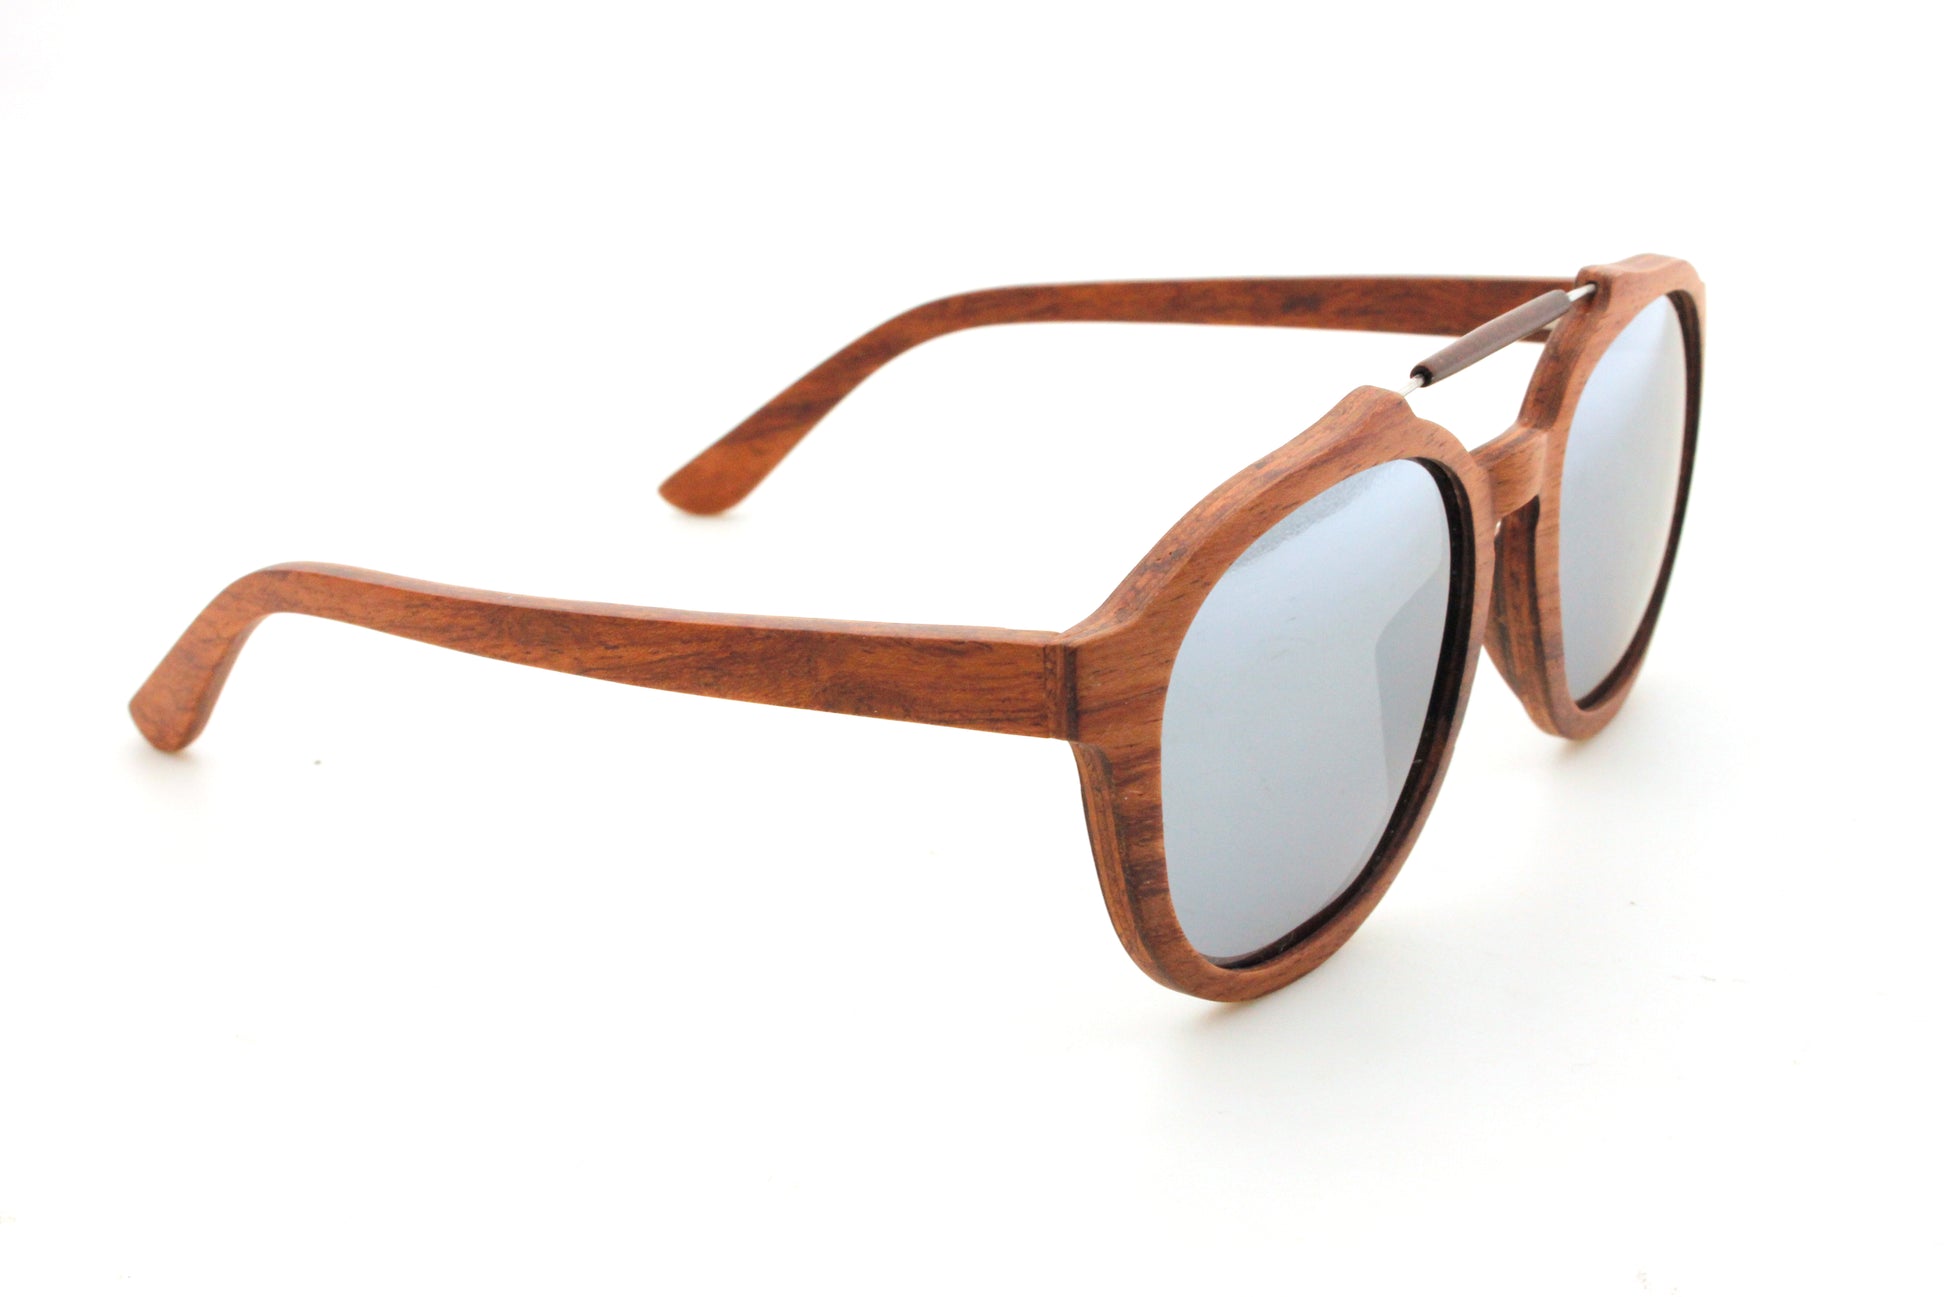 Barcella bubinga wood sunglasses view from the right